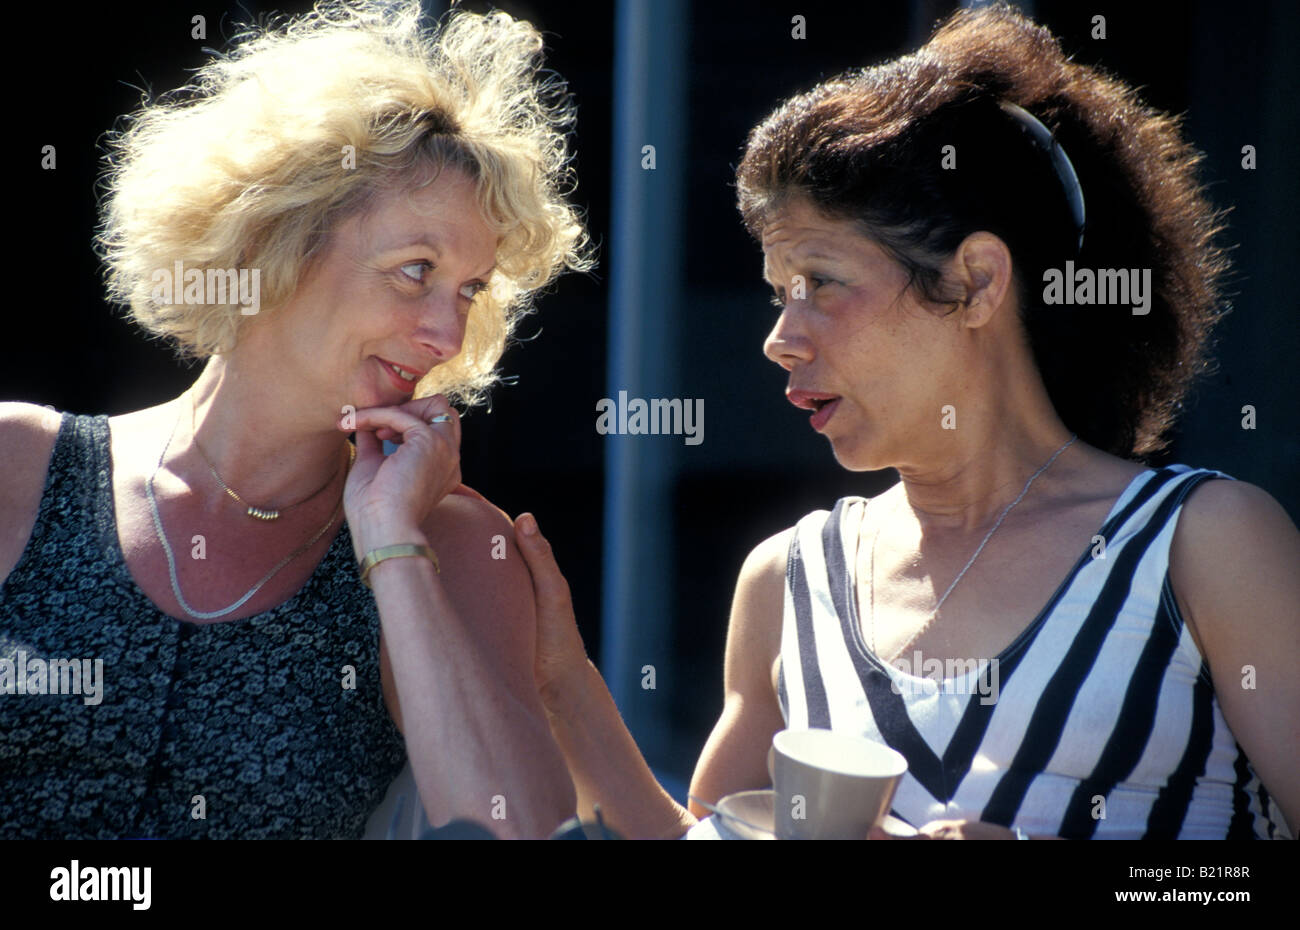 two middle aged women gossiping over coffee on outside terrace Stock Photo